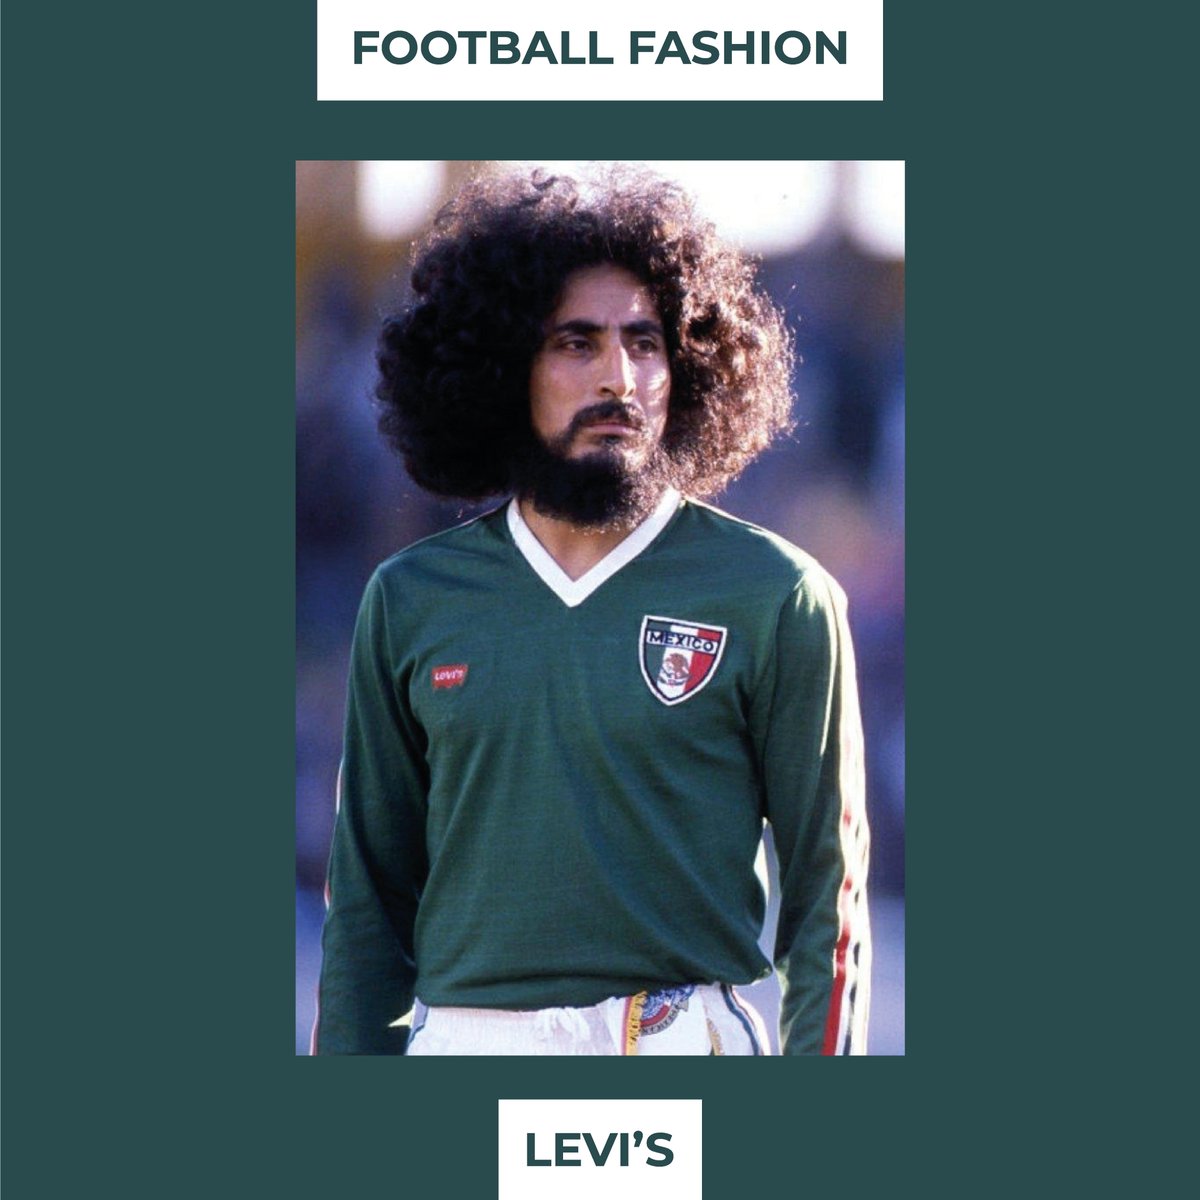 Did you know that at the 1978 World Cup Mexico's kits were made by Levis?Can you think of any other fashion brands that have sponsored a football team?